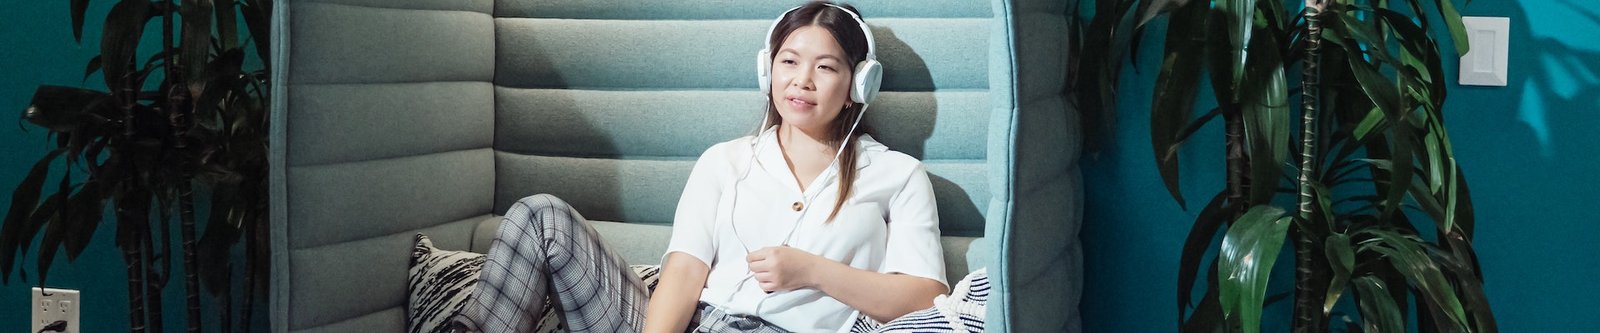 Woman listening to music in office chill out area and recovering from work